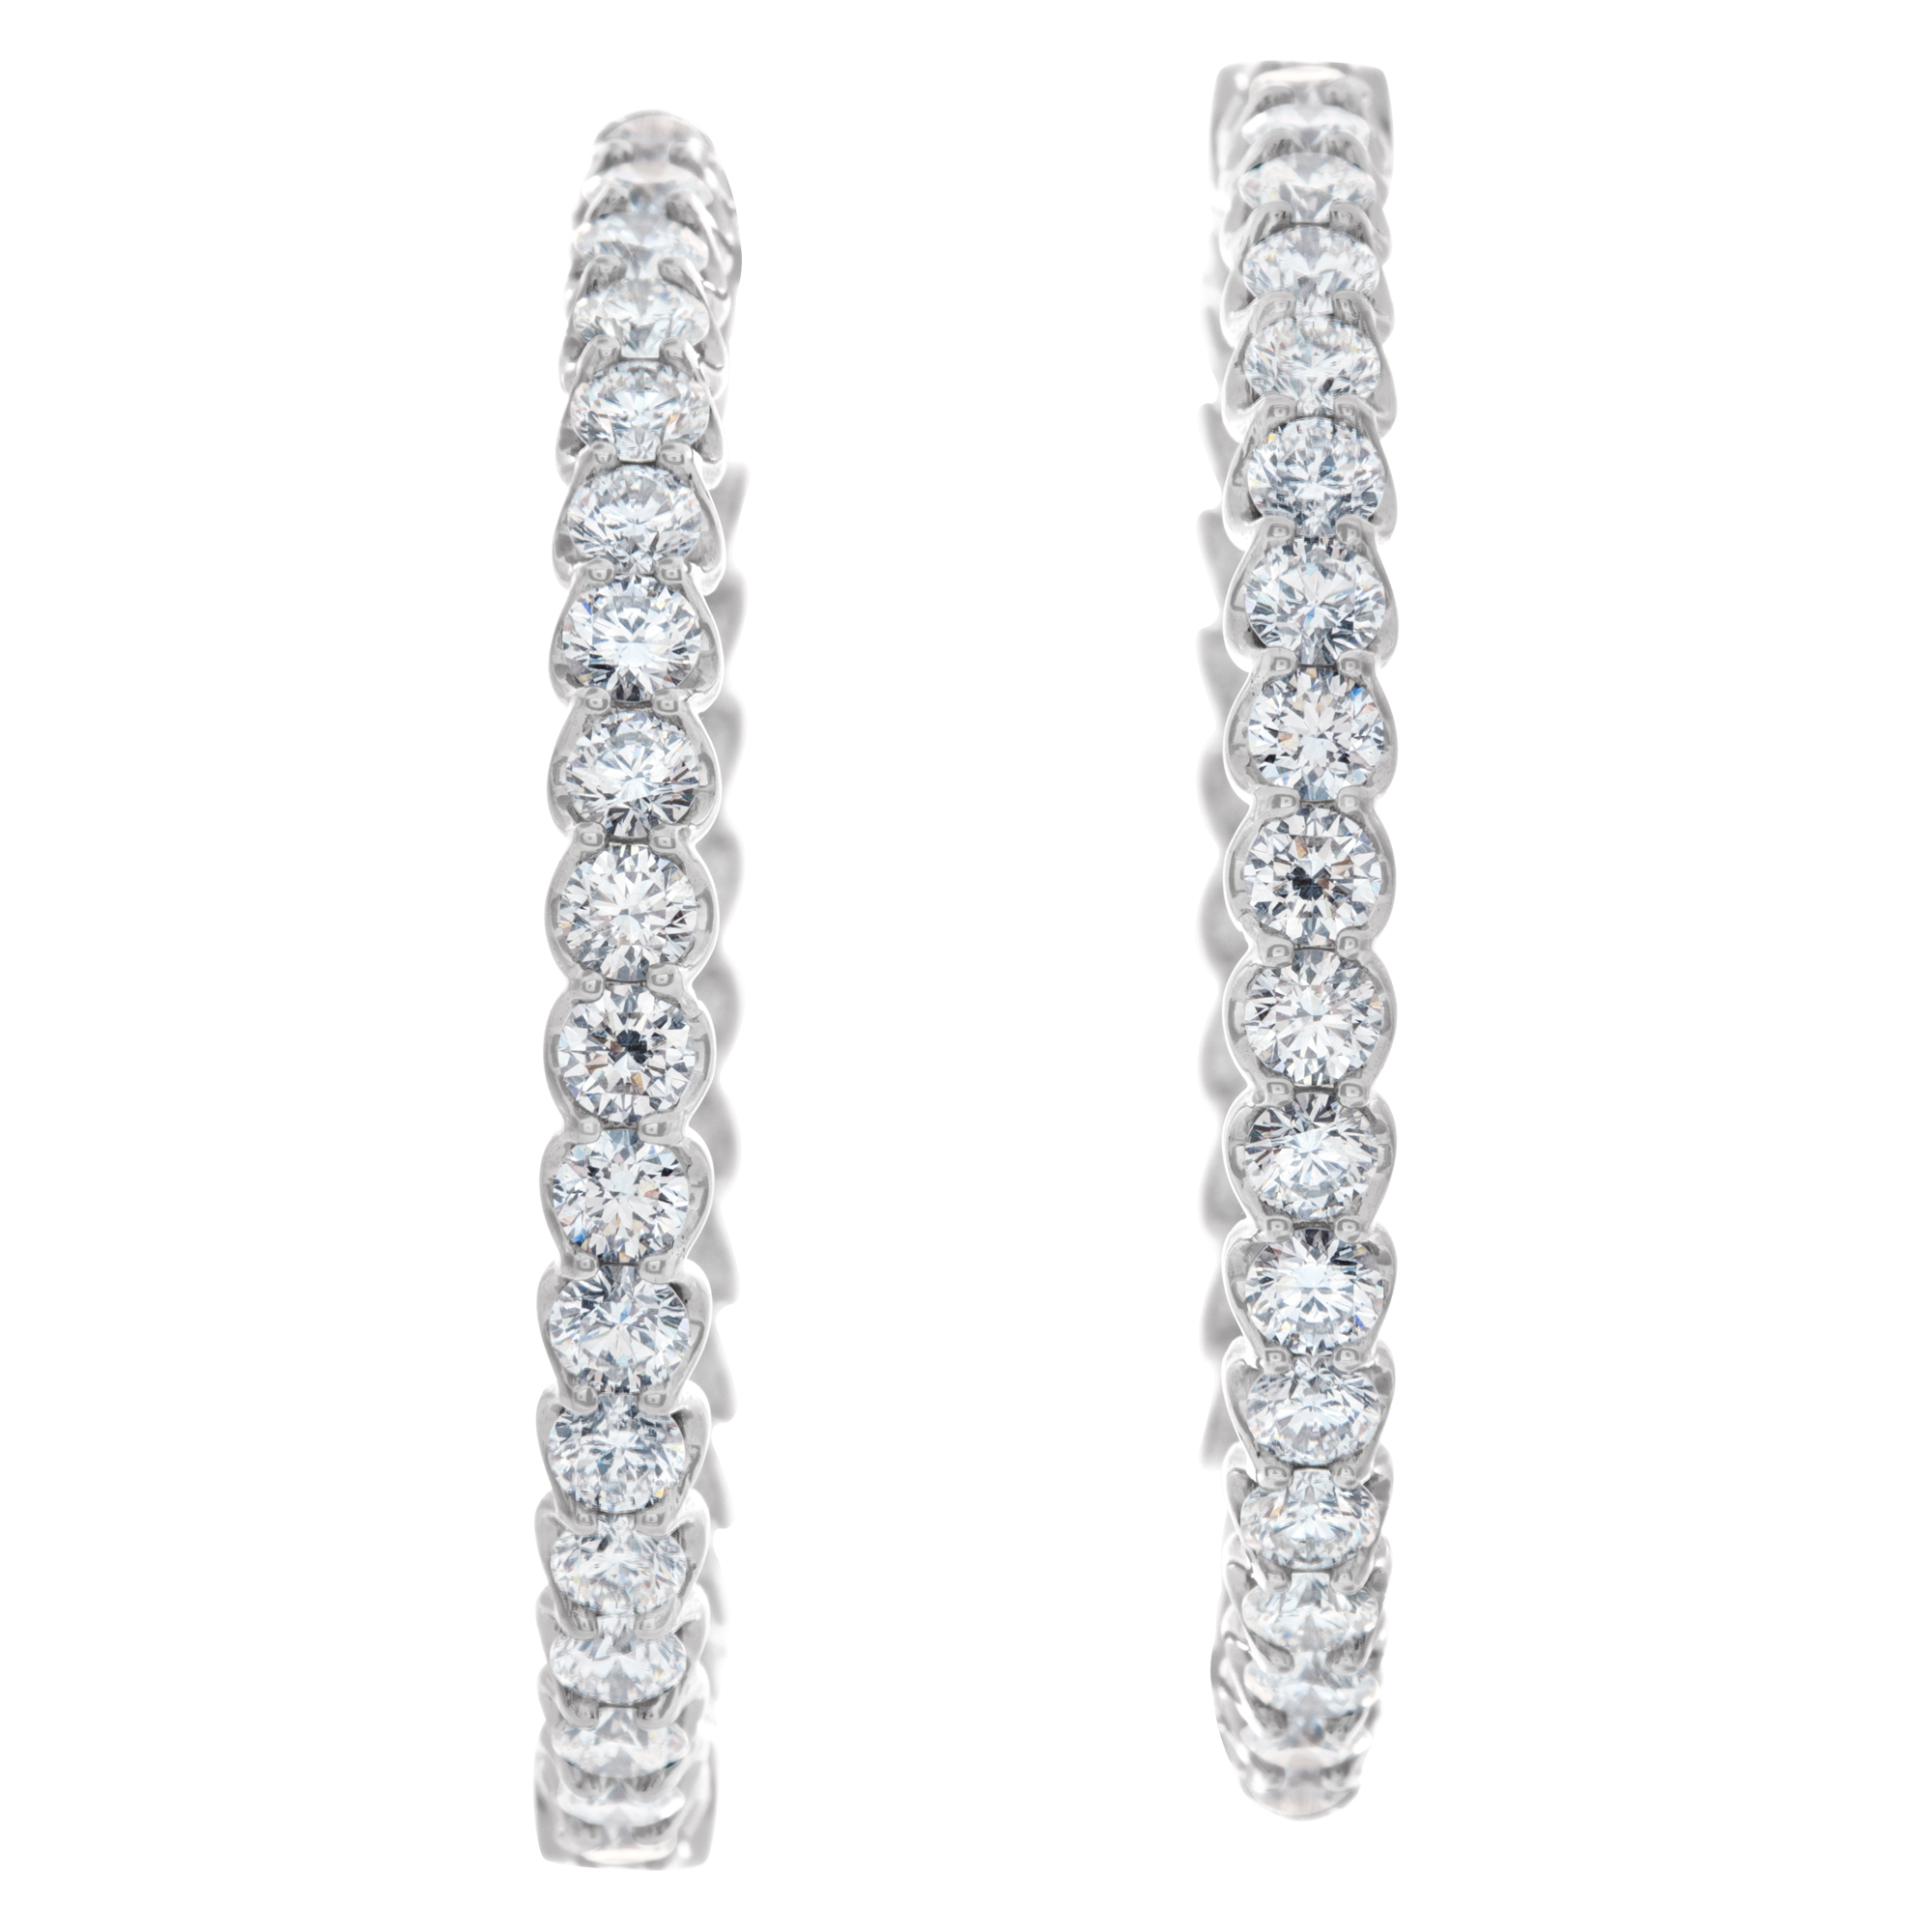 Inside-out diamonds hoop earringsset in 14k white gold. Round brilliant cut diamonds total approx. wweight: 3.90 carats image 1